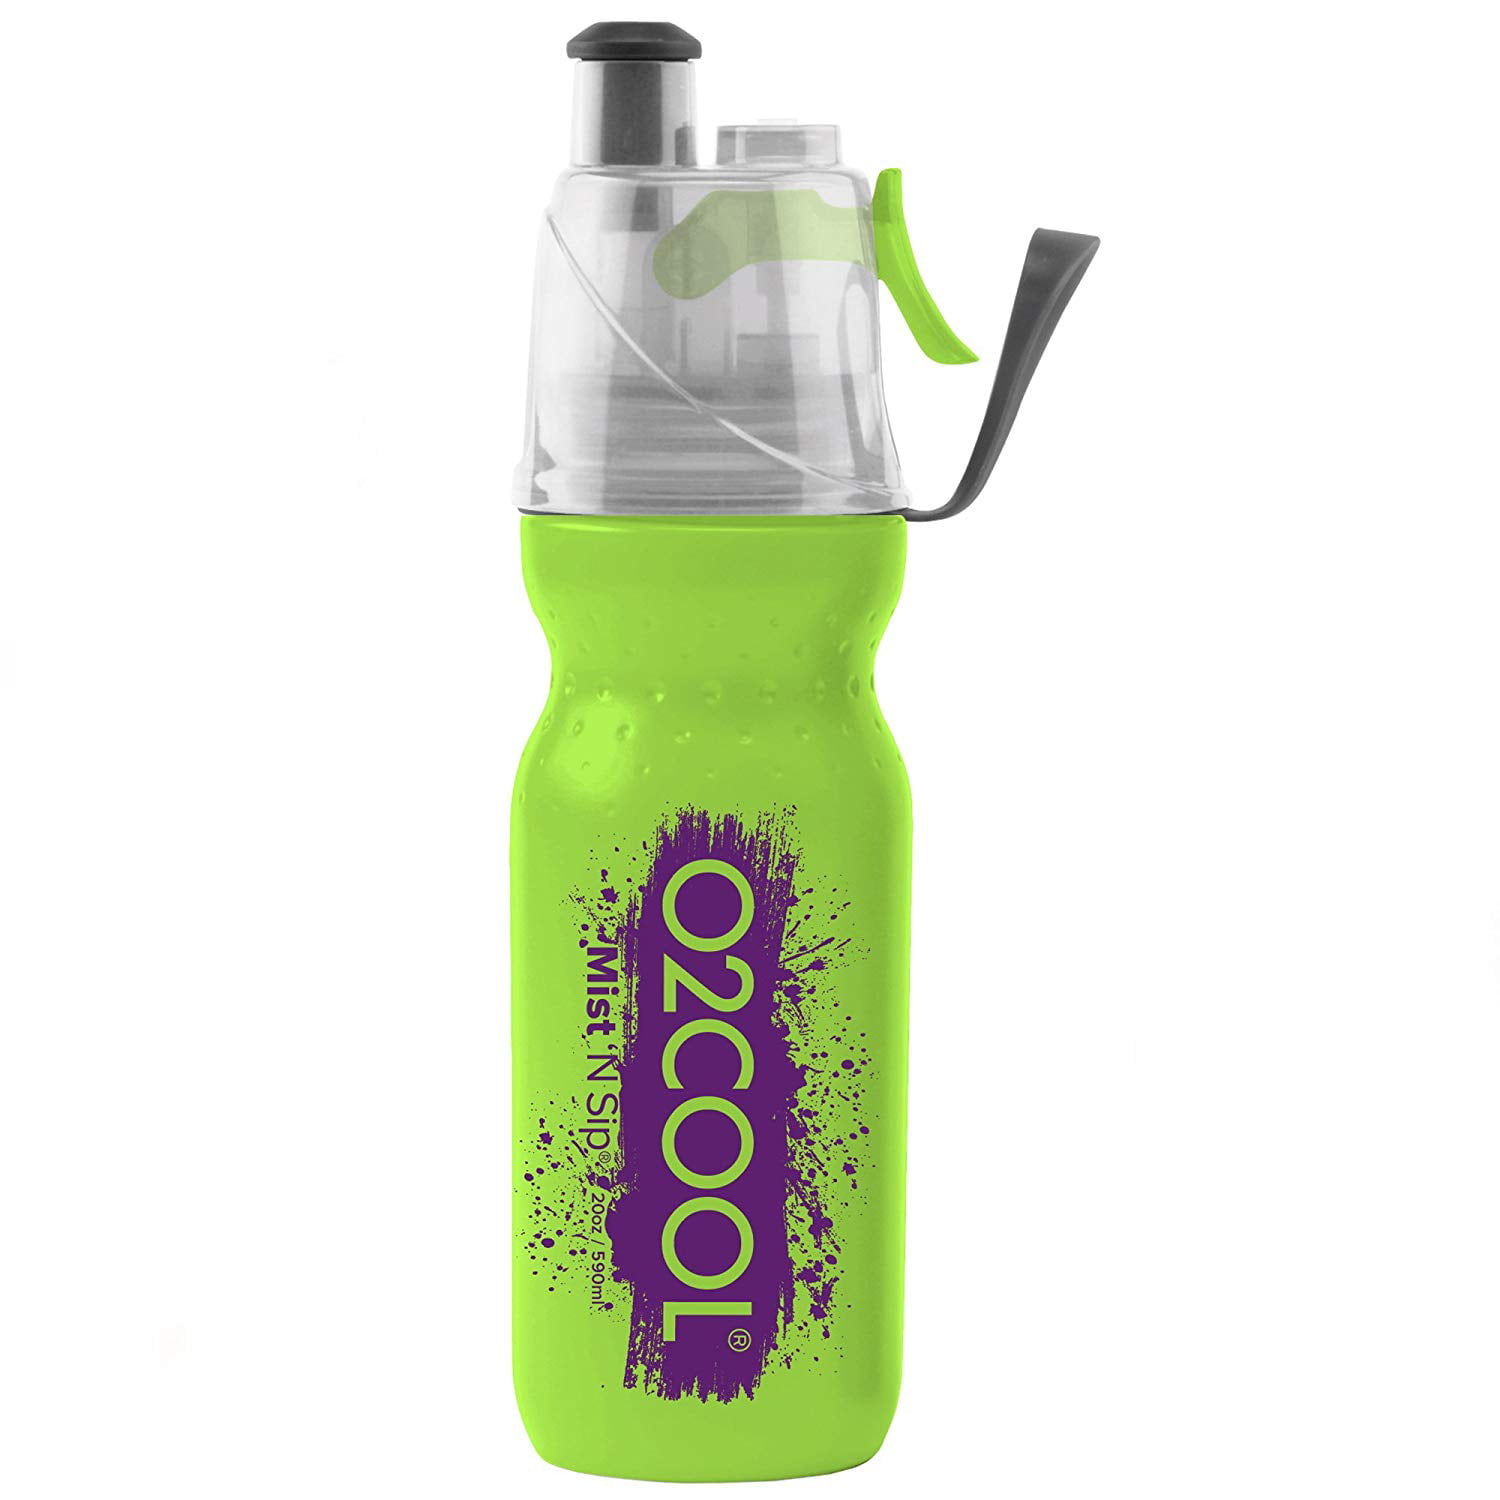 O2COOL Arcticsqueeze® Insulated Mist 'N Sip® Squeeze 20 oz., 2-in-1 Mist 'N  Sip® Function, Double-Wall Insulation, Water Bottle, Misting Water Bottle,  No Leak Water Bottle, No Sweat Water Bottle 